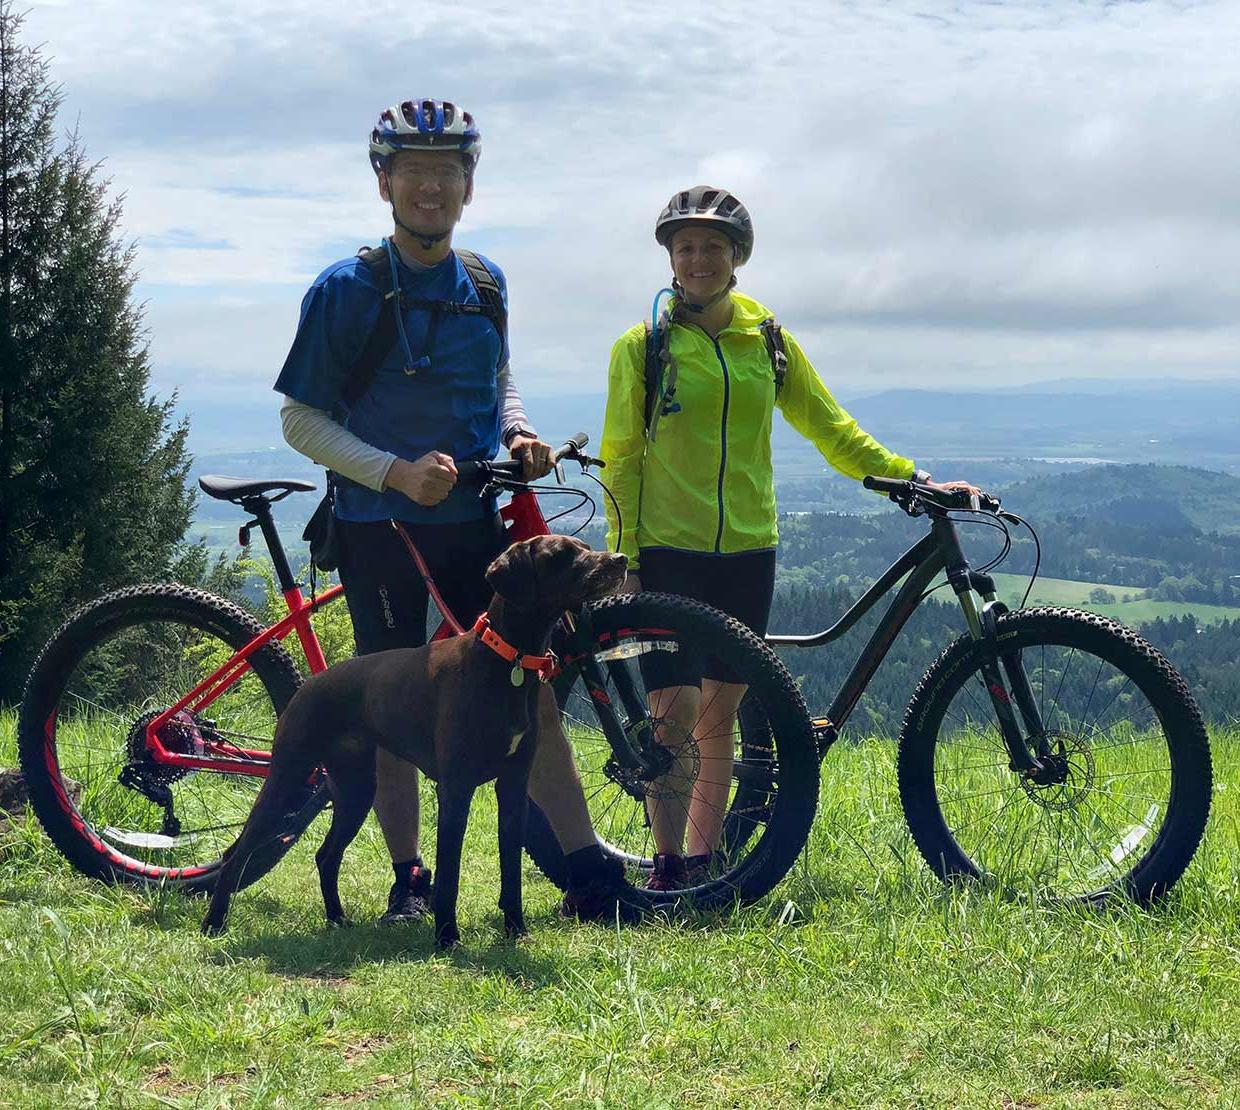 Courtney Rae Armour with husband and dog riding mountain bikes atop grassy hill